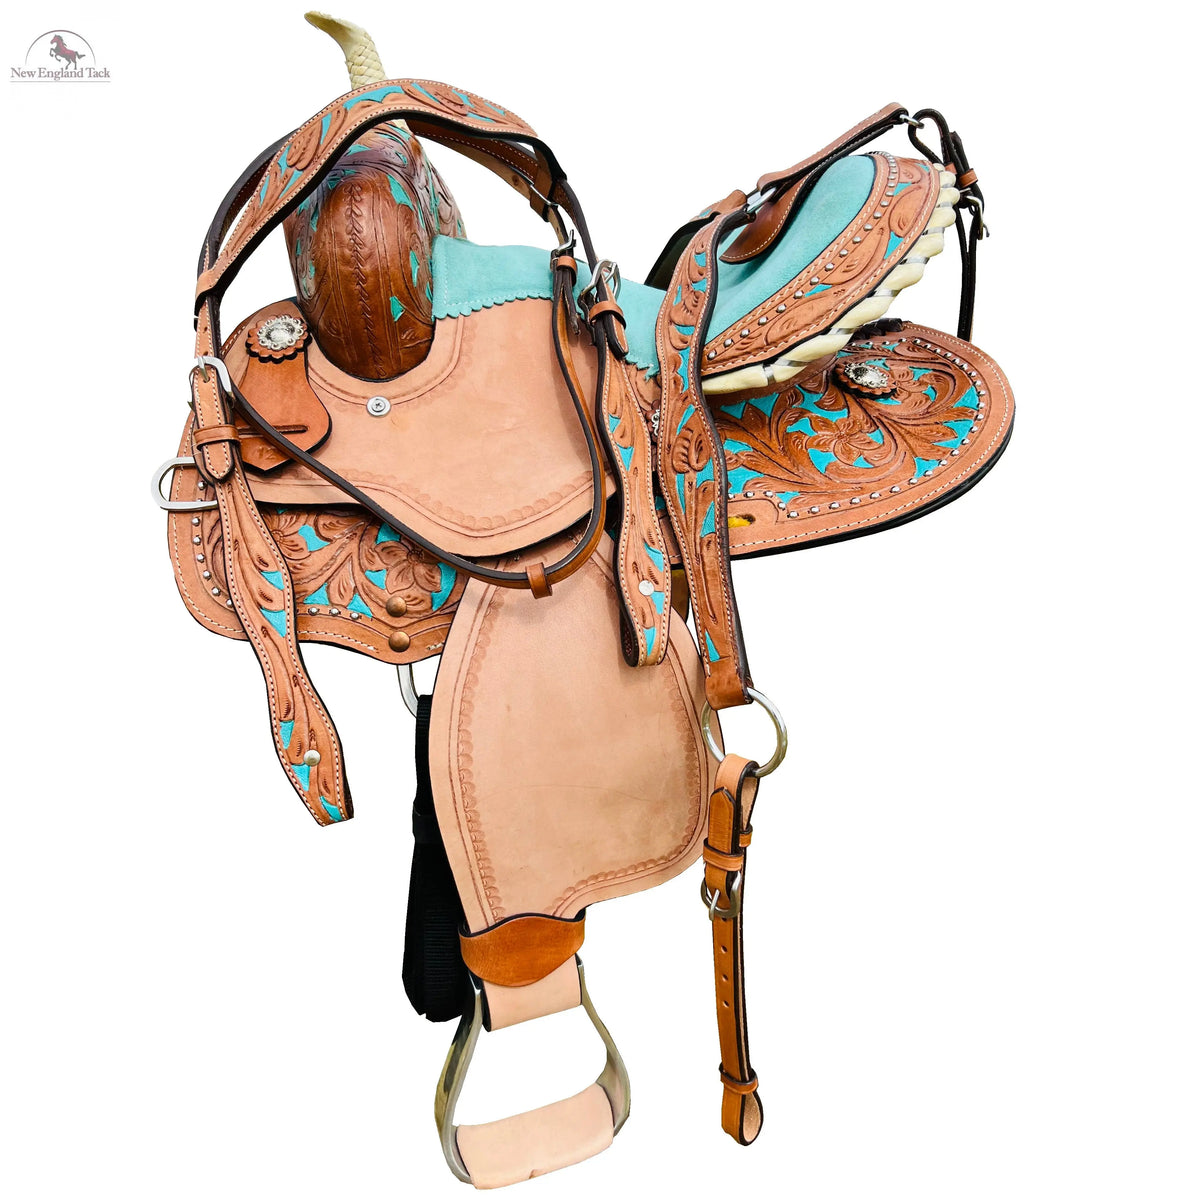 http://www.newenglandtack.com/cdn/shop/files/Western-Horse-Saddle-Barrel-Trail-Youth-Kids-Leather-10-12-13---With-Free-Tack-set-NewEngland-Tack-1695334978520_1200x1200.jpg?v=1695335811